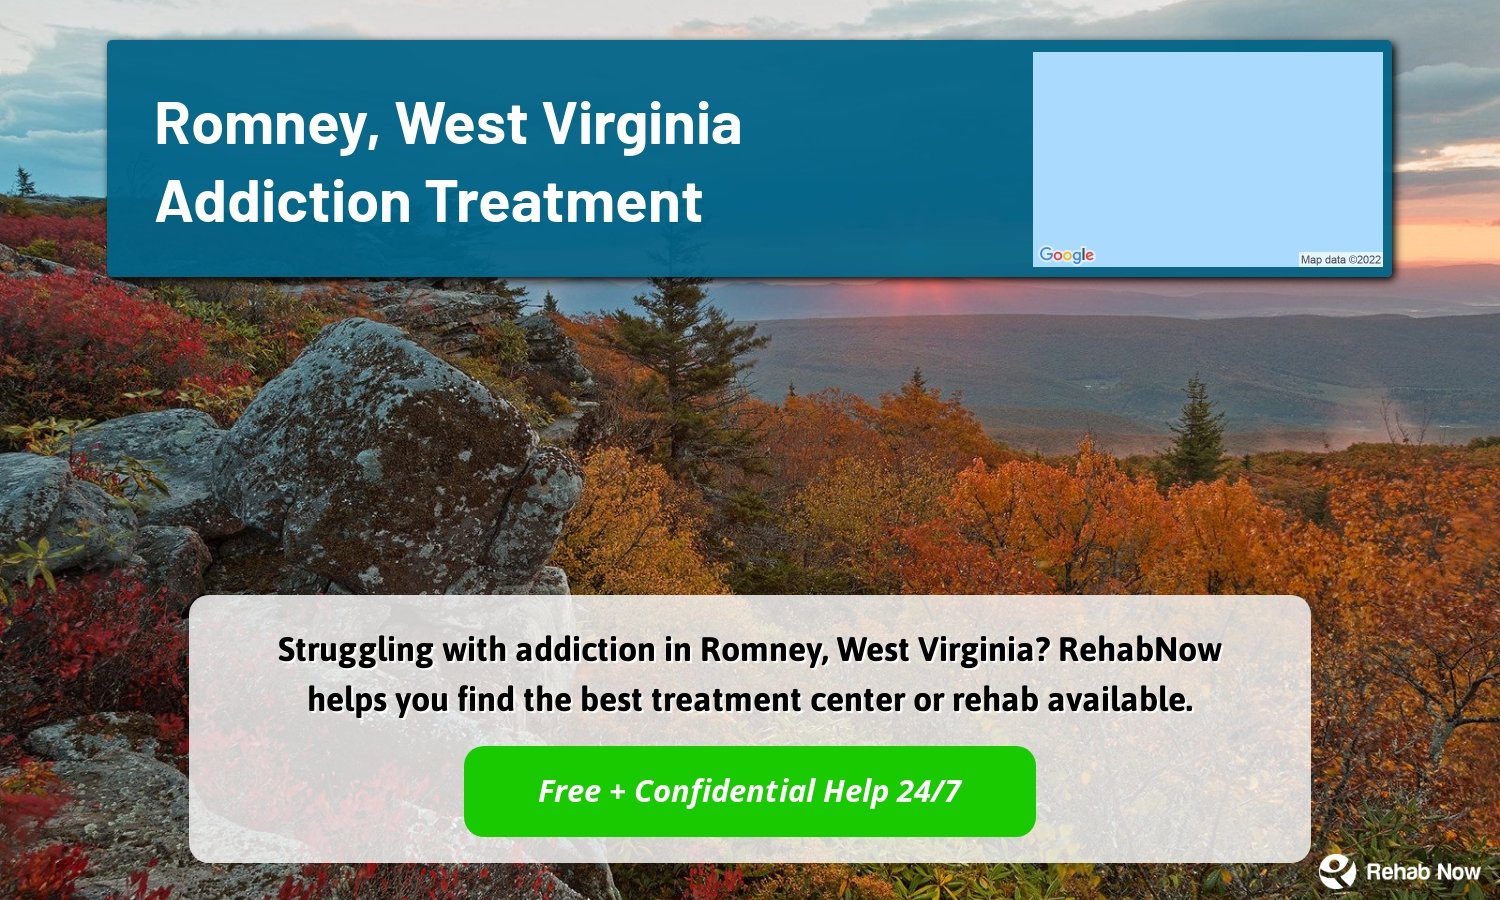 Struggling with addiction in Romney, West Virginia? RehabNow helps you find the best treatment center or rehab available.